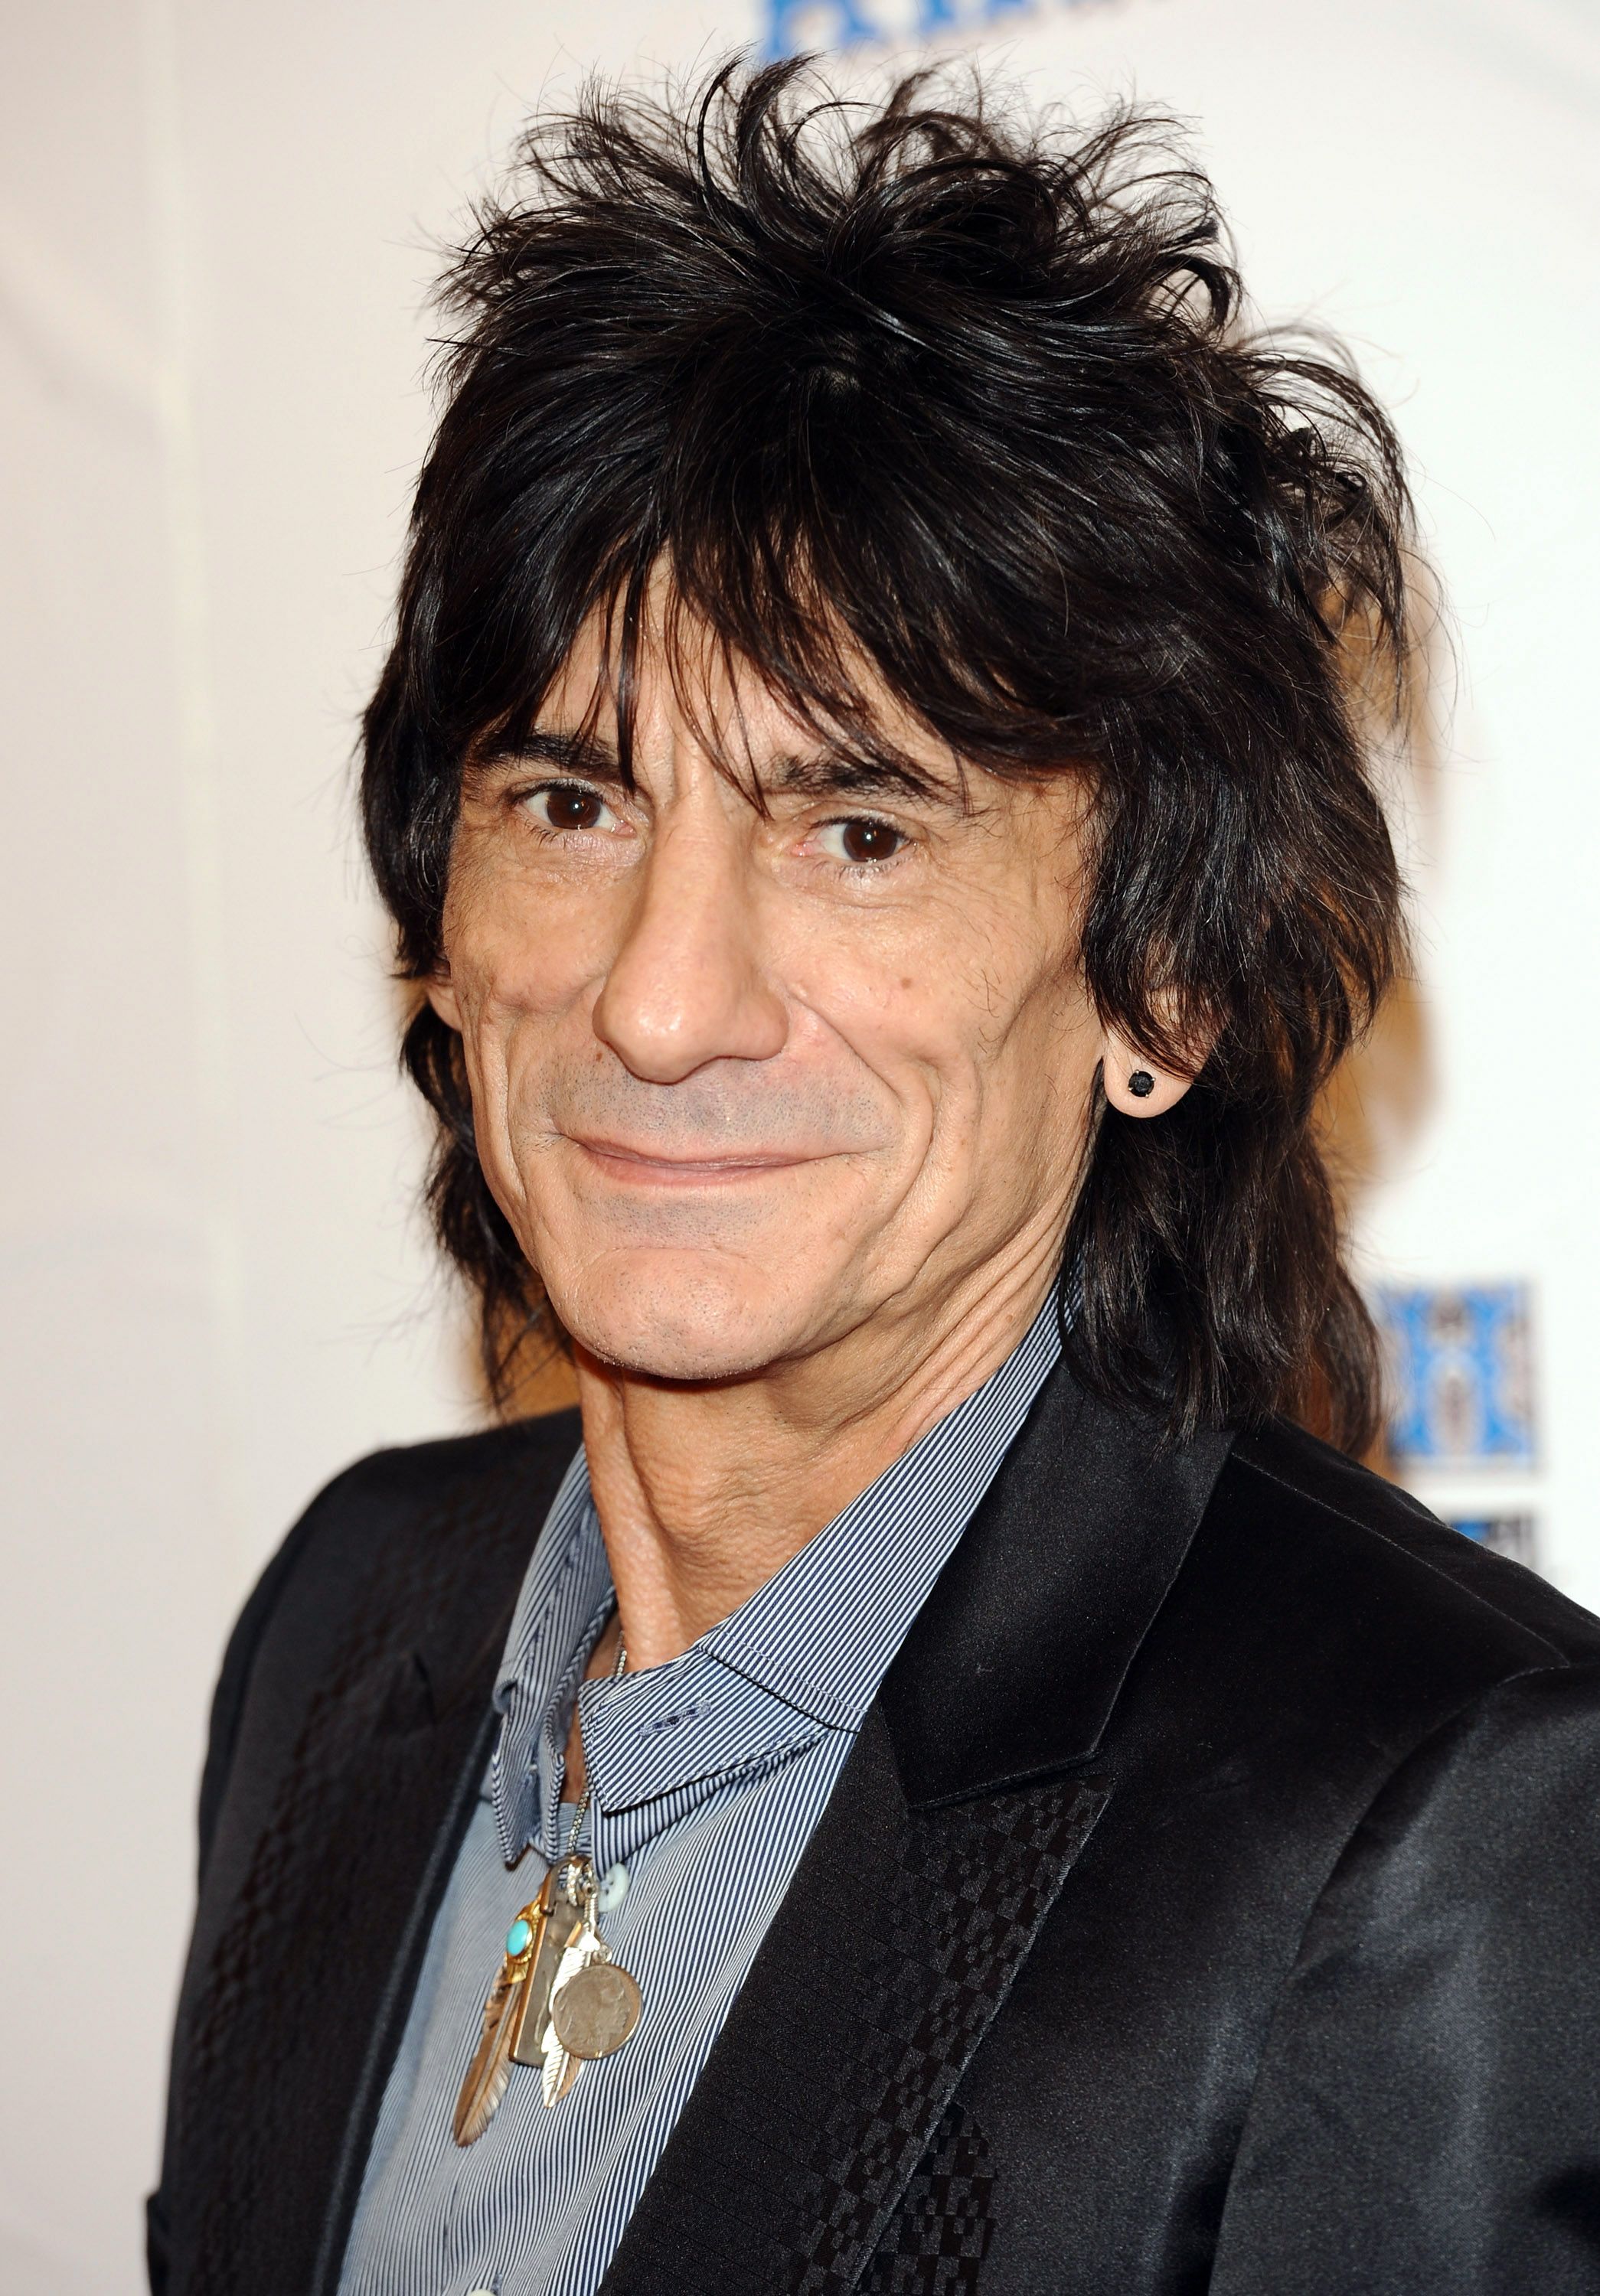 Ronnie Wood at The South Bank Show Awards at the Dorchester on January 26, 2010 in London, England. | Photo: Getty Images